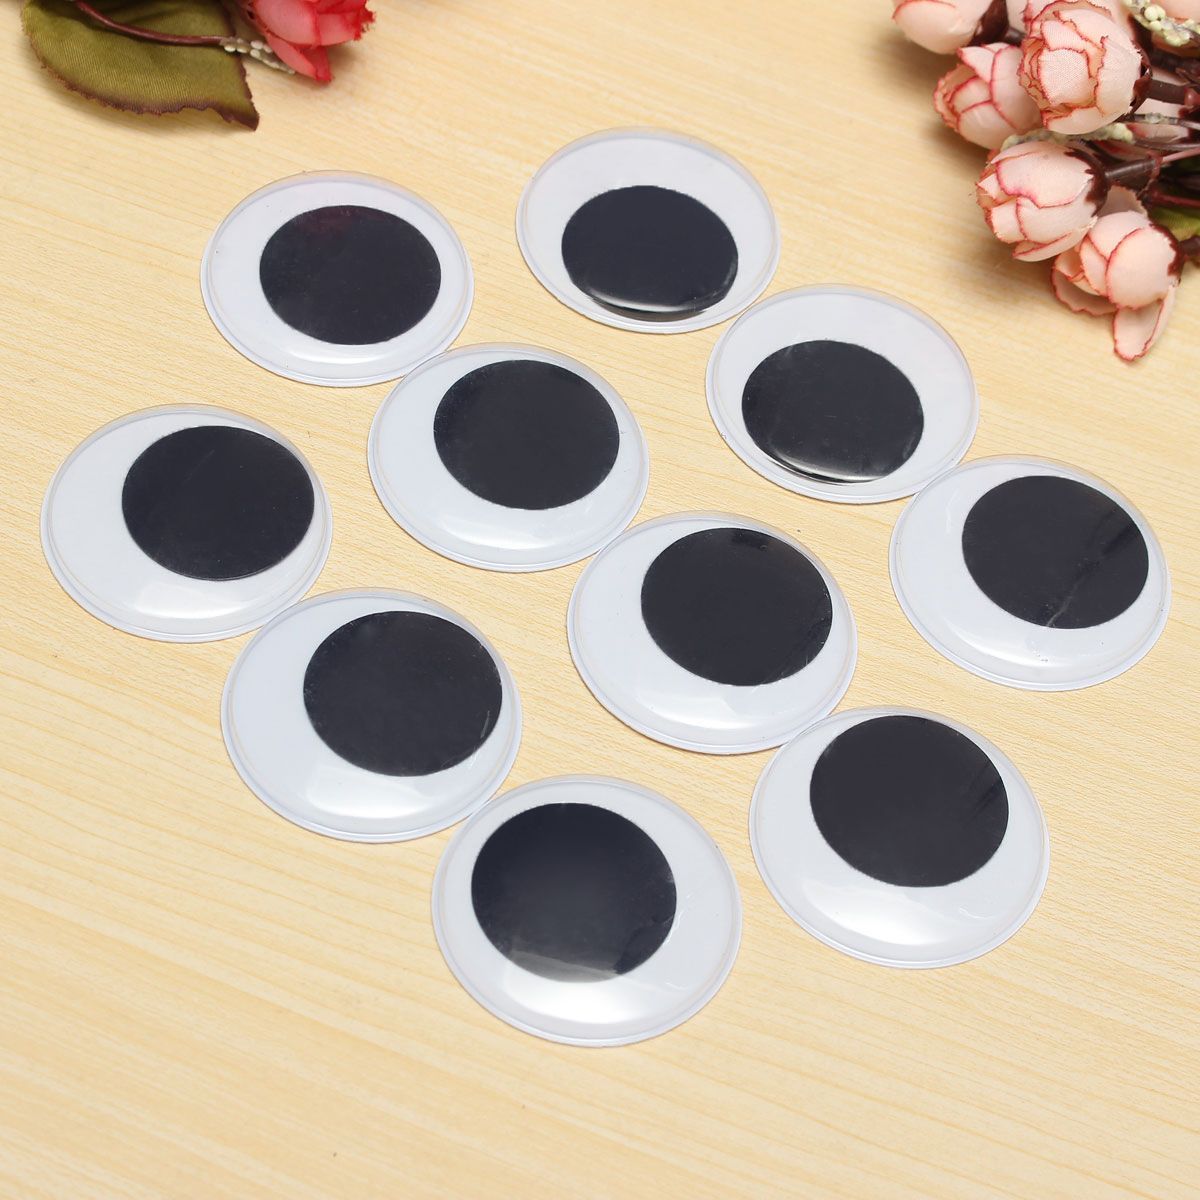 10pcs-50mm-DIY-Scrapbooking-Crafts-Toys-Big-Black-Wiggly-Wobbly-Giant-Googly-Eyes-1581115